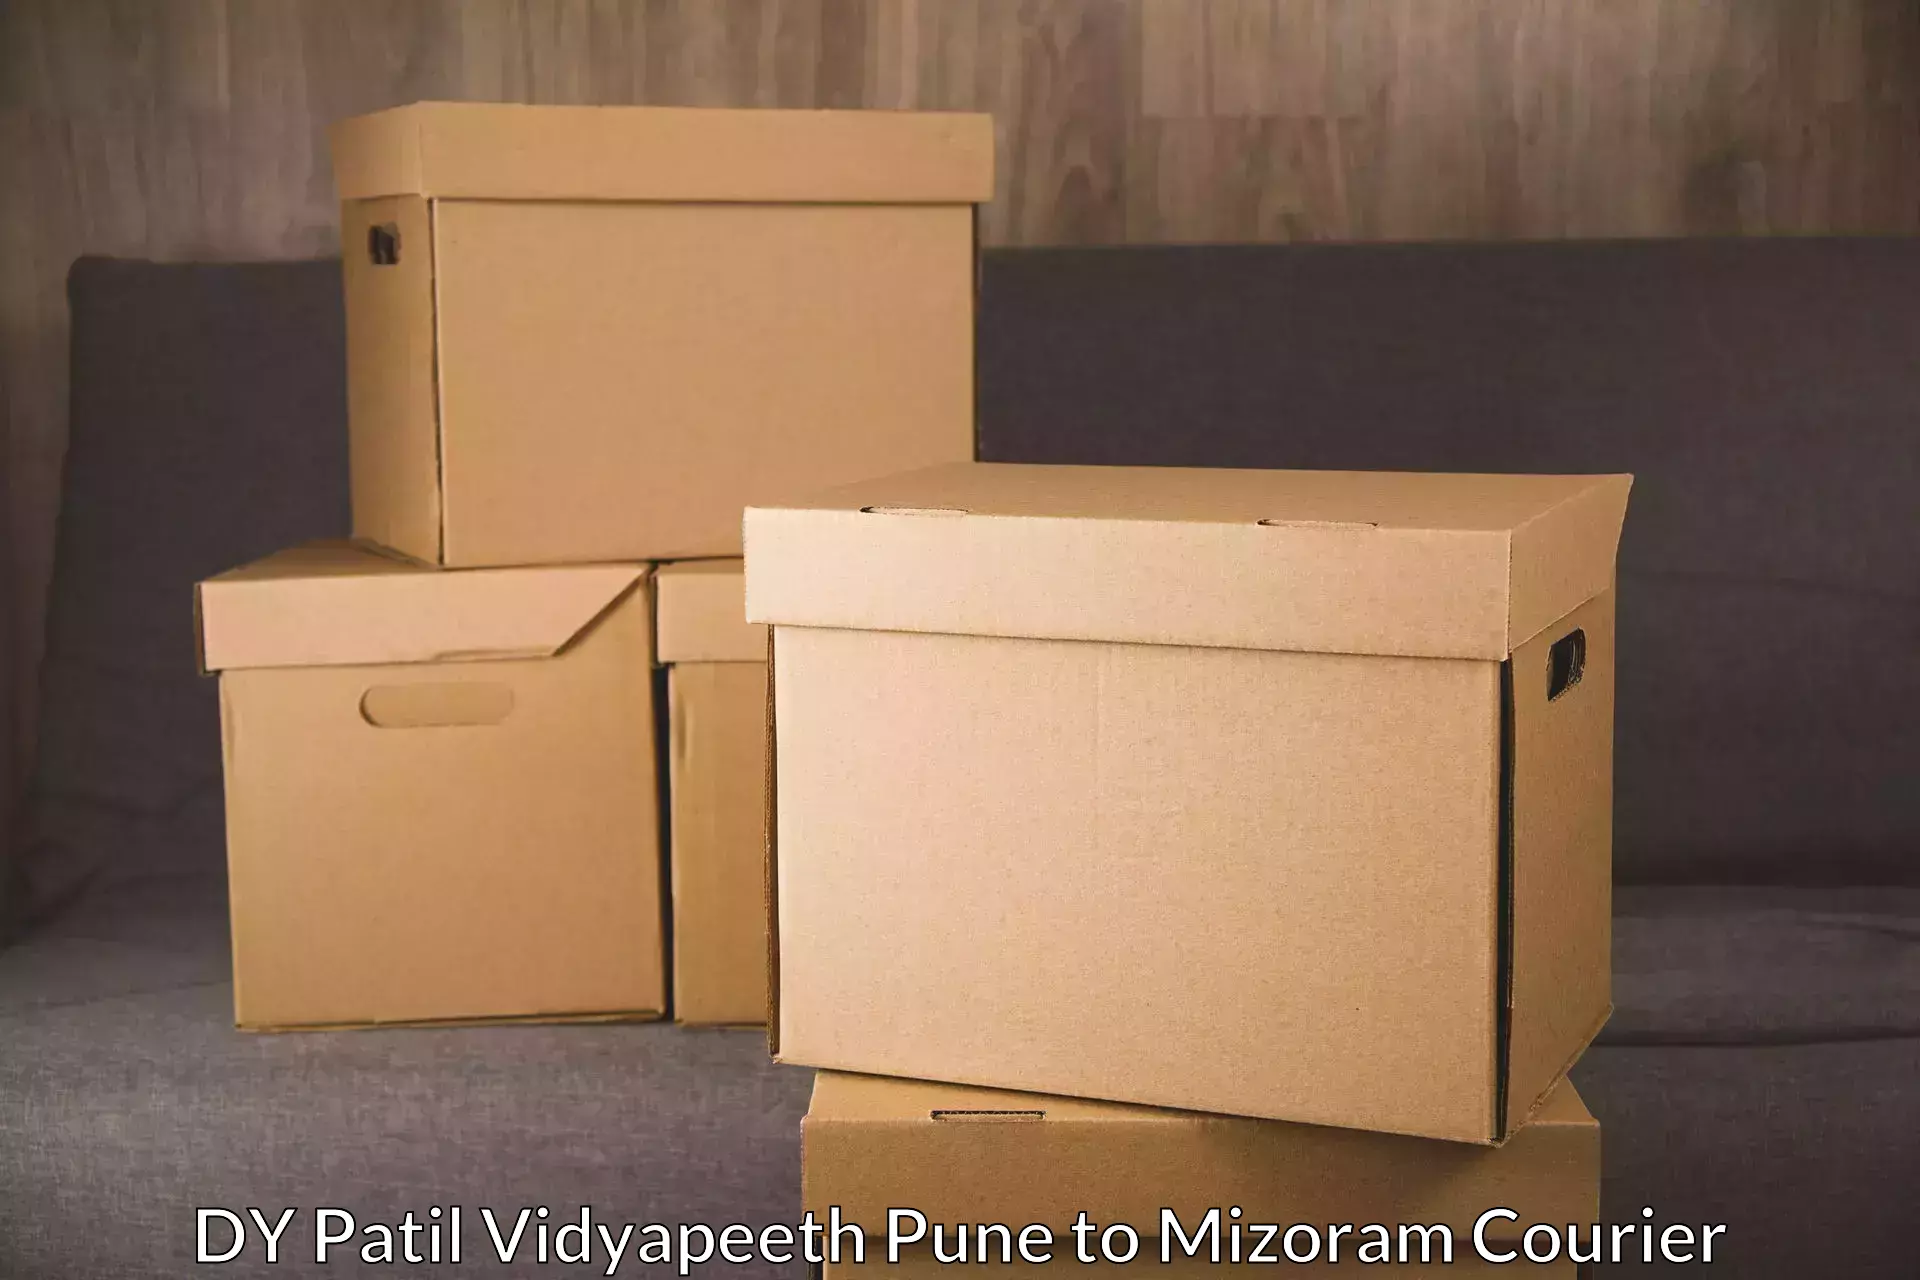 Multi-national courier services DY Patil Vidyapeeth Pune to Hnahthial